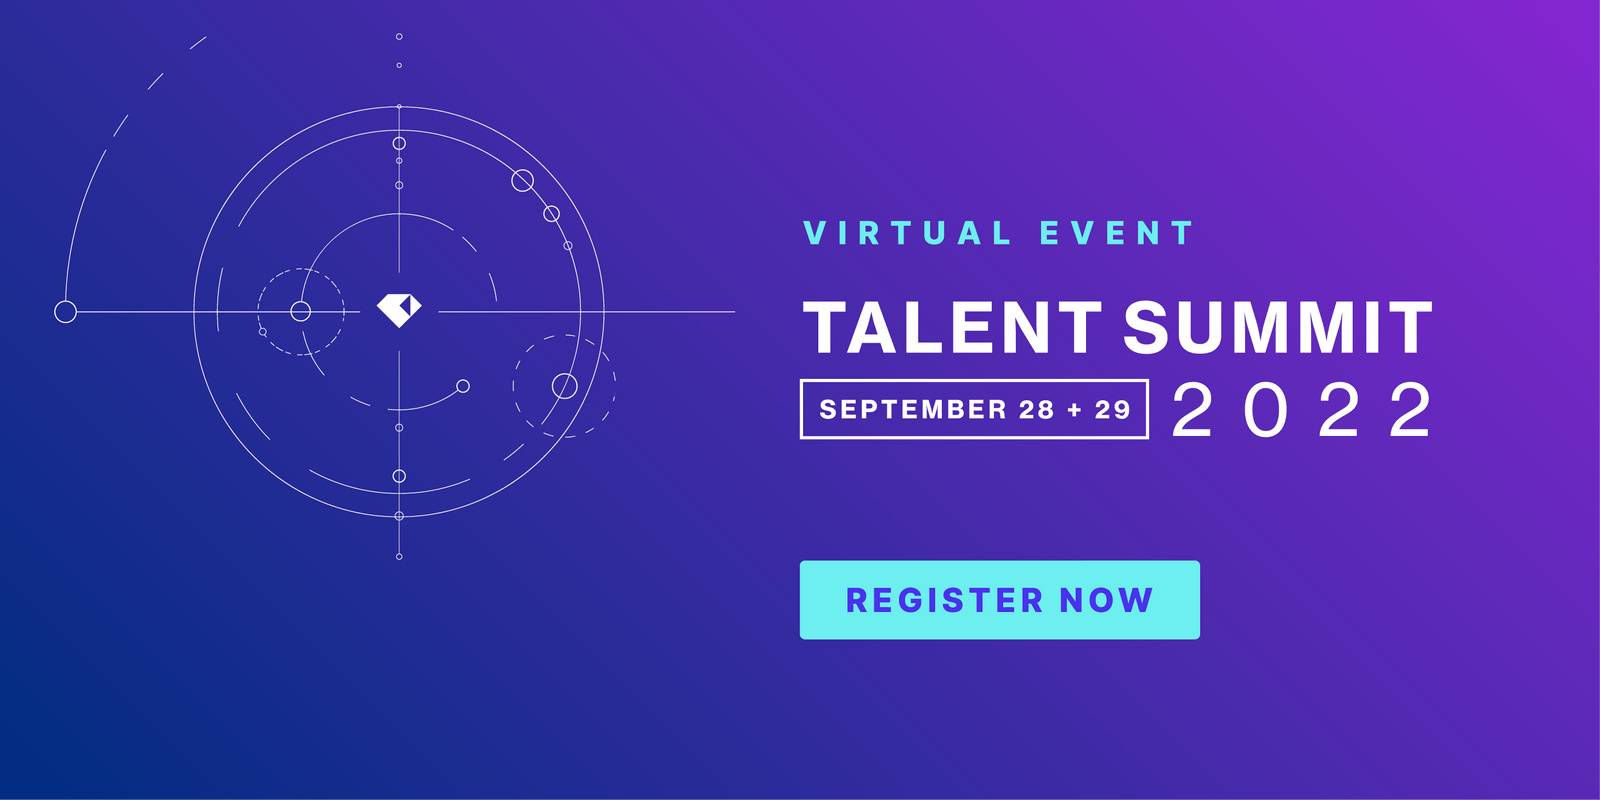 Talent Summit 2022: The conference for TA leaders and teams